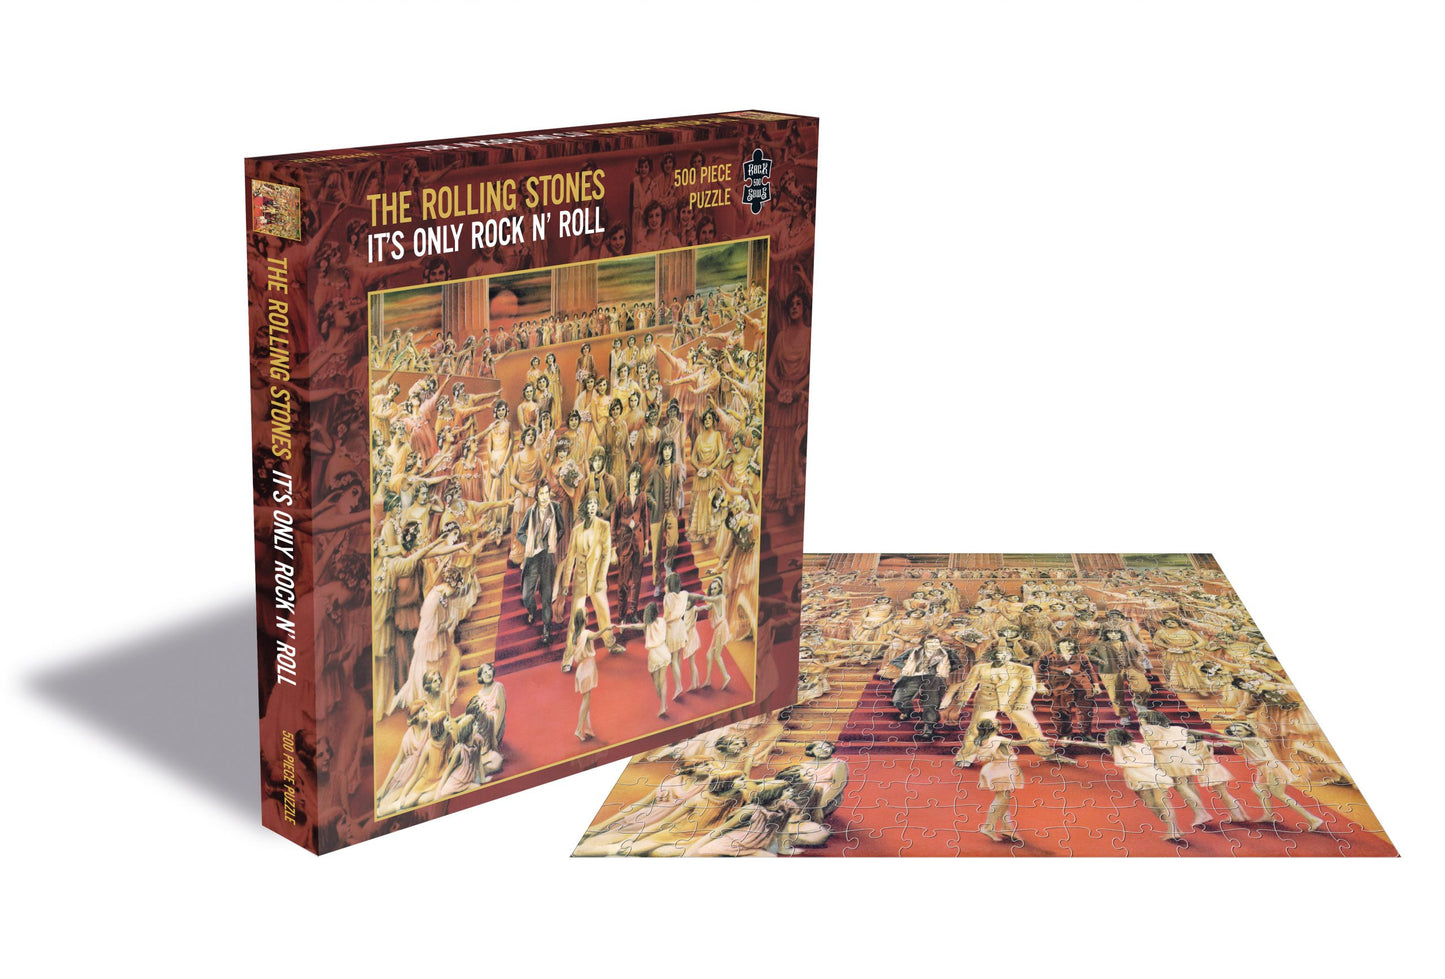 The Rolling Stones - It's only Rock 'n Roll, 500 Piece Puzzle